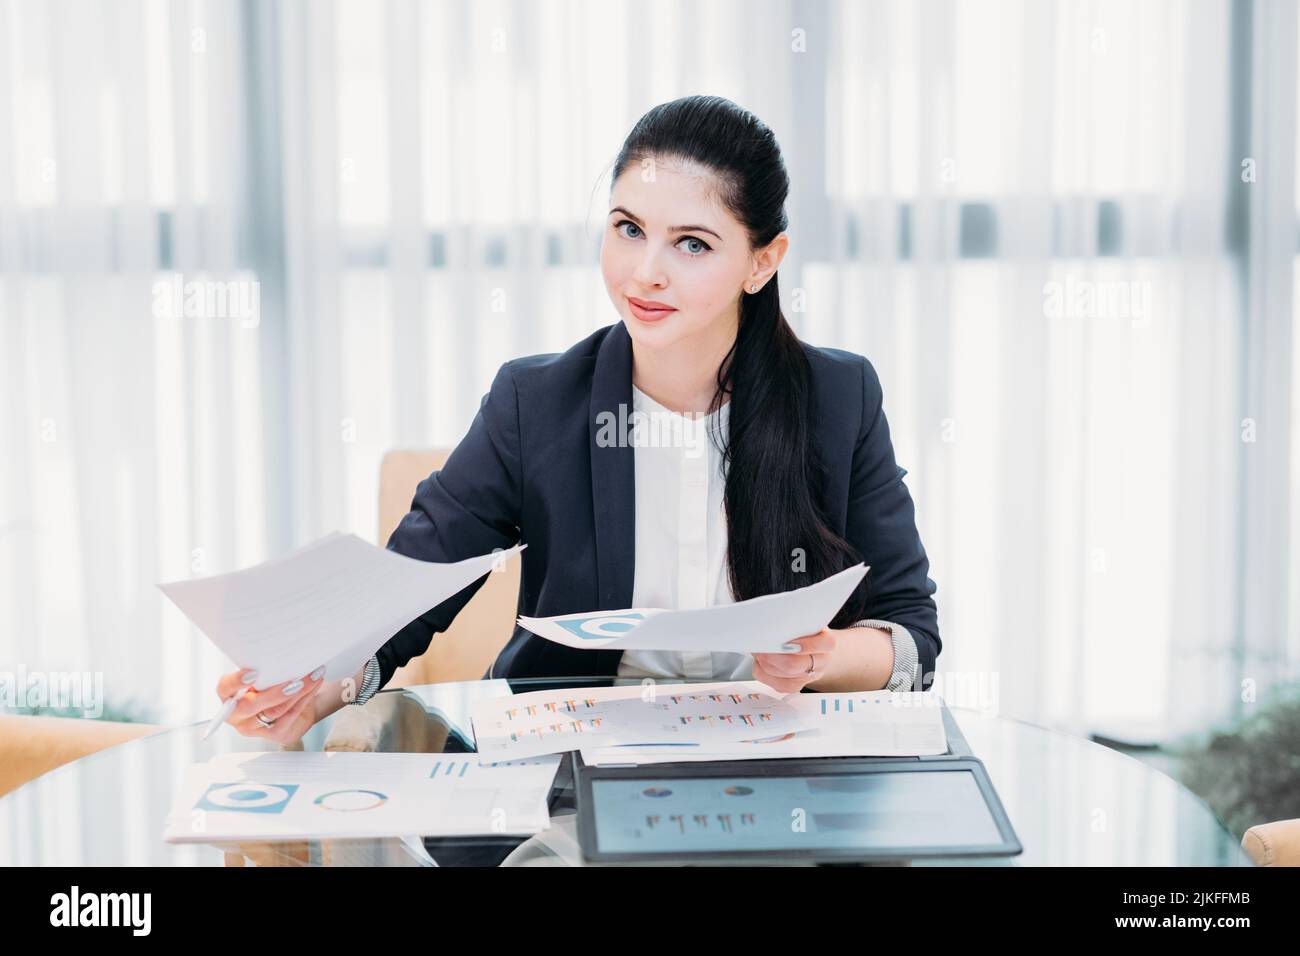 business lady work manager documents office Stock Photo